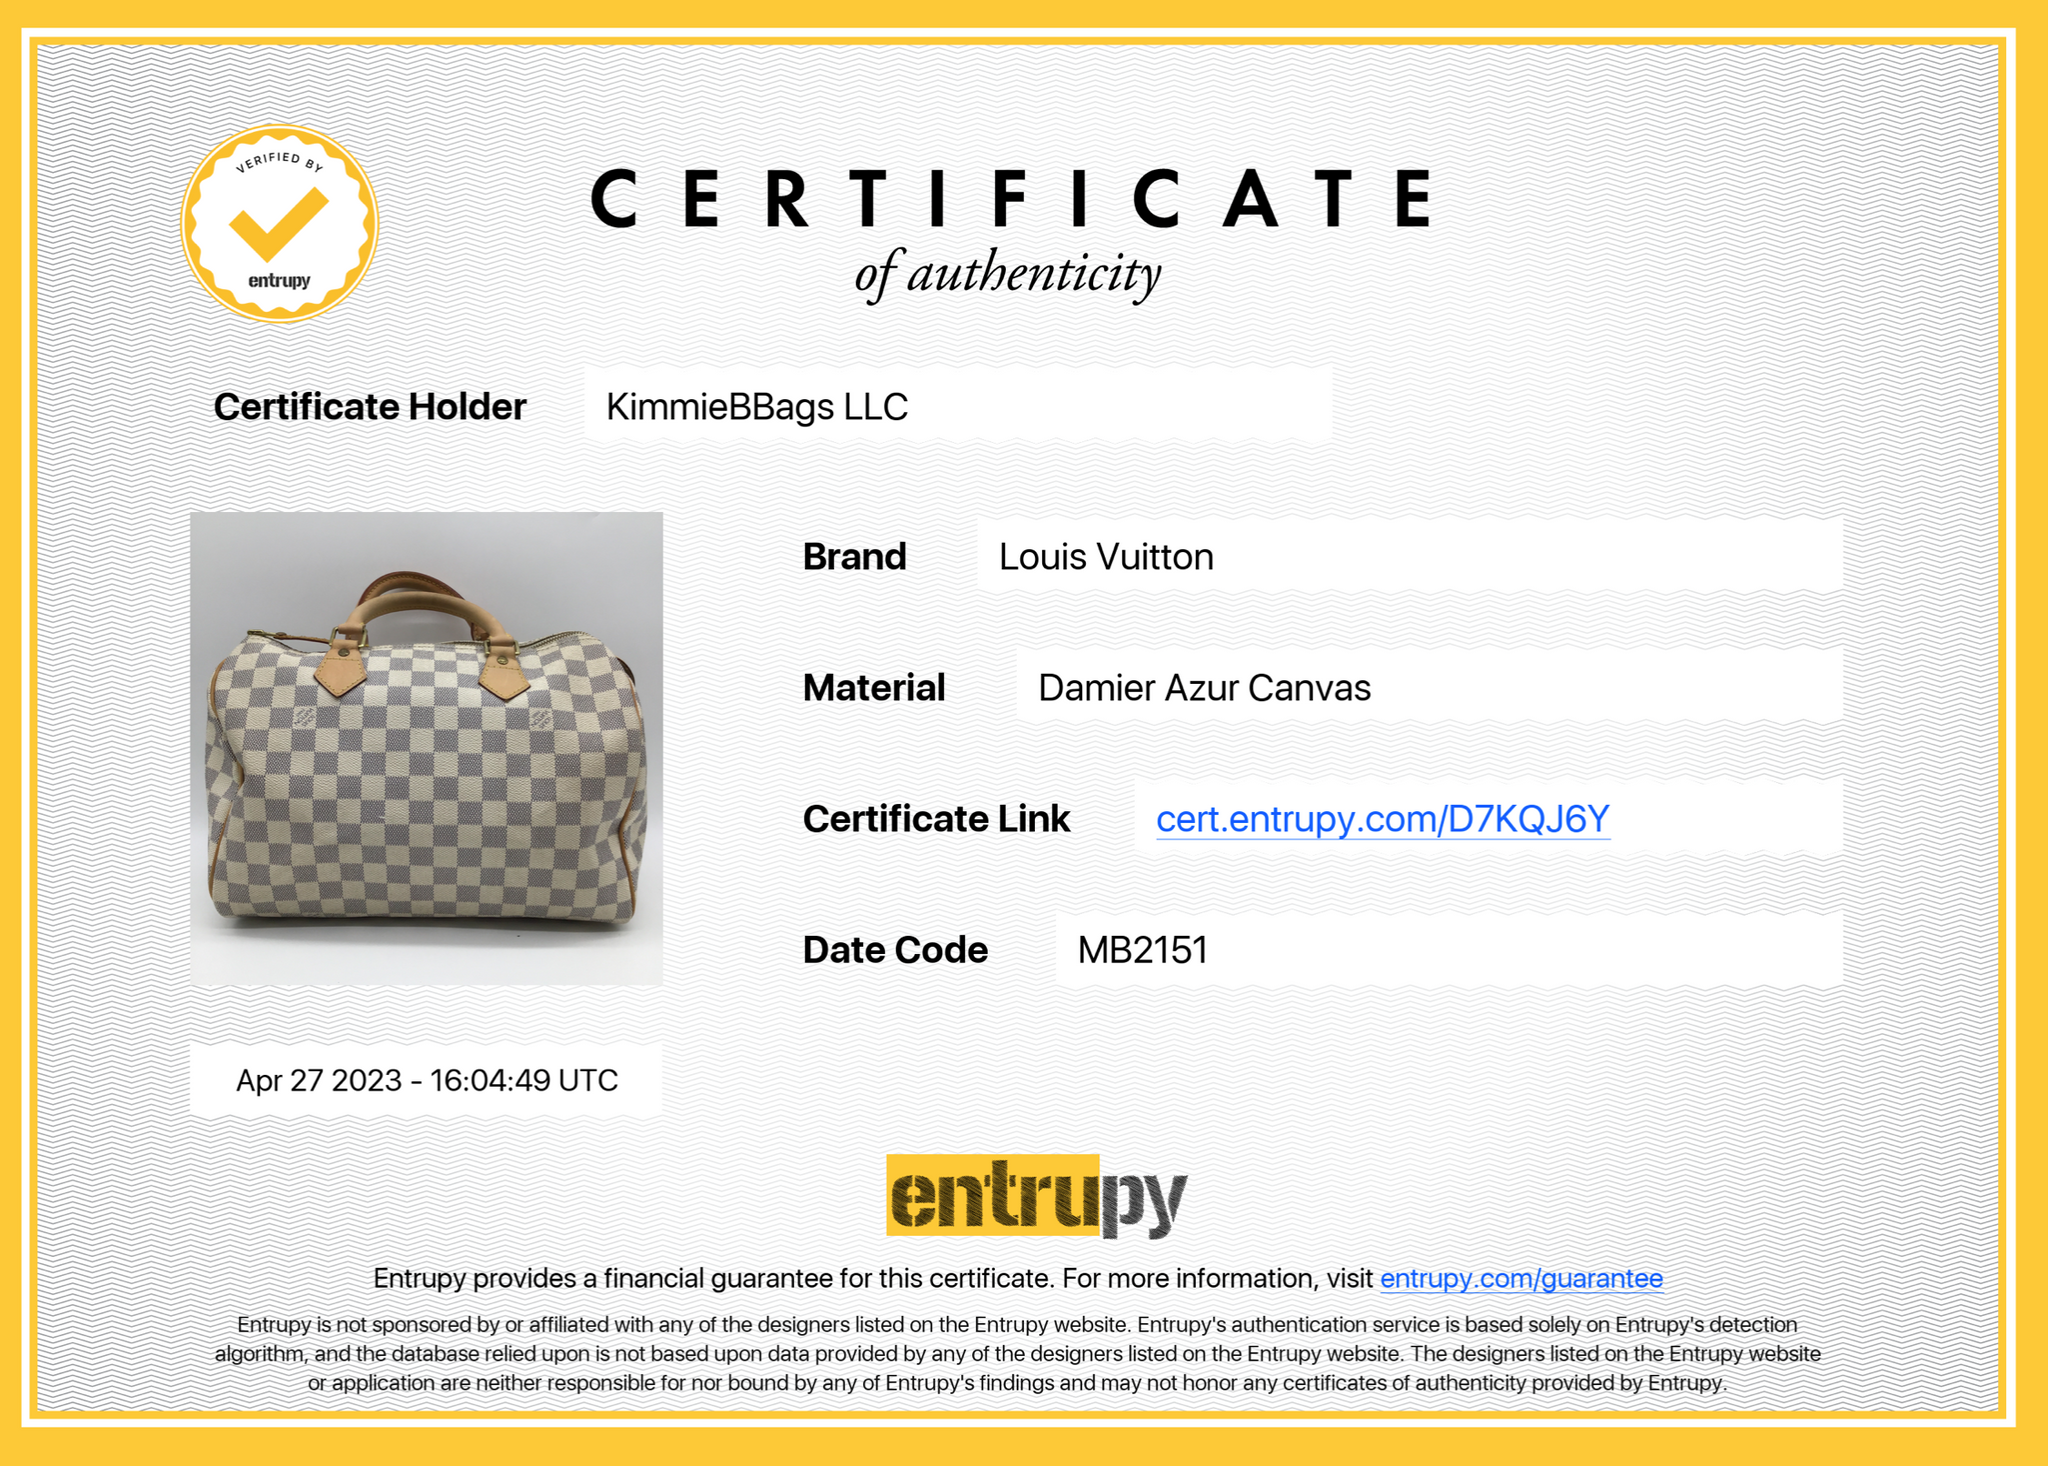 Louis Vuitton Damier Azur Speedy 30 Bag ○ Labellov ○ Buy and Sell Authentic  Luxury